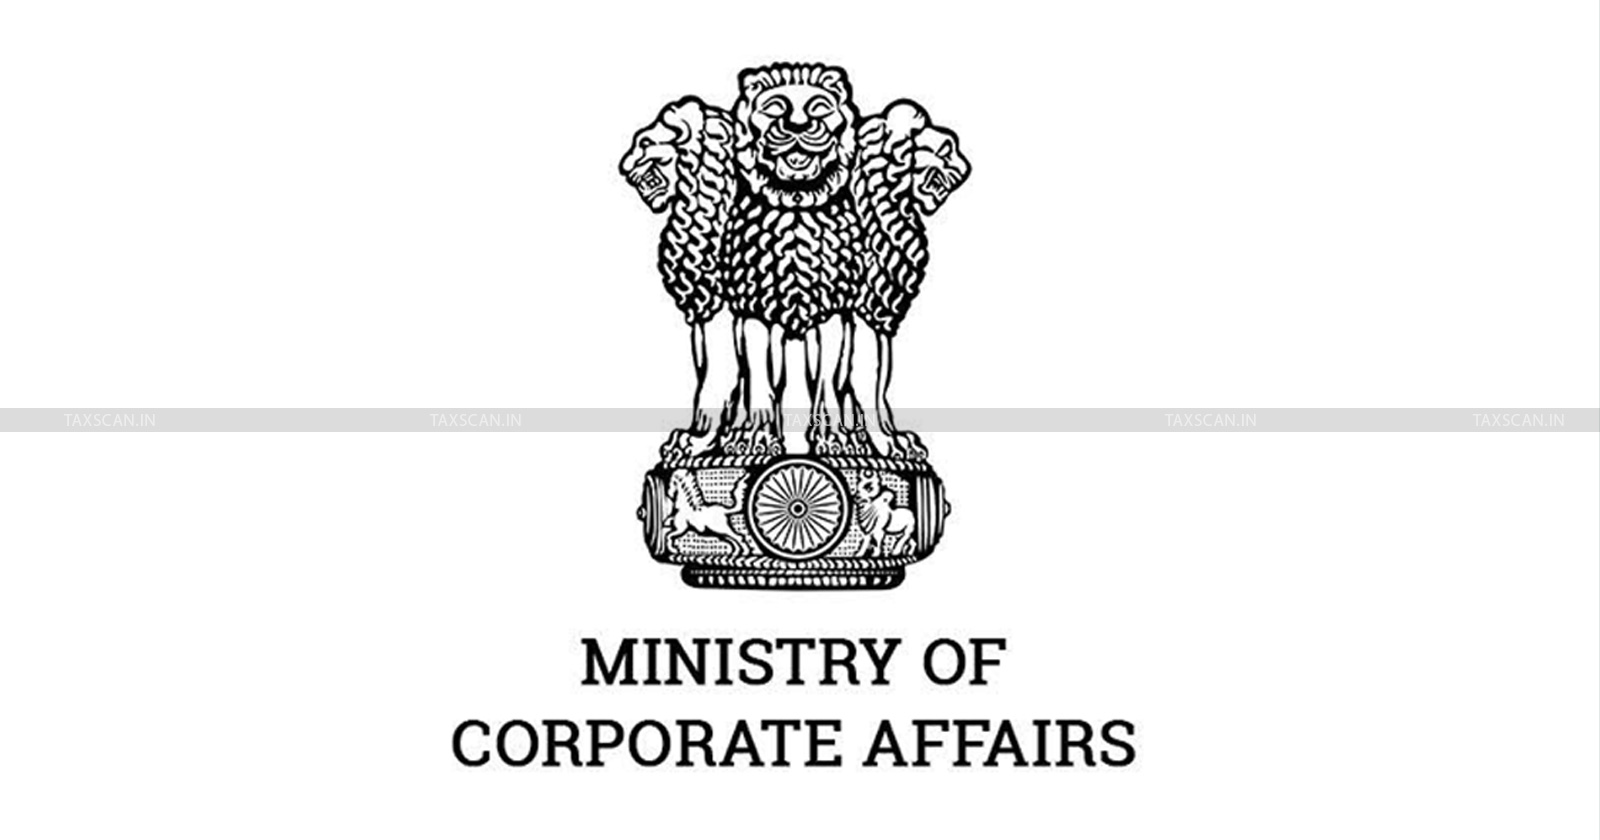 Chartered Accountants - Election Tribunal Rules - MCA notifies appointment - Ministry of Corporate Affairs - Corporate Affairs - Rakesh Tiwari Ministry Of Corporate Affairs - TAXSCAN